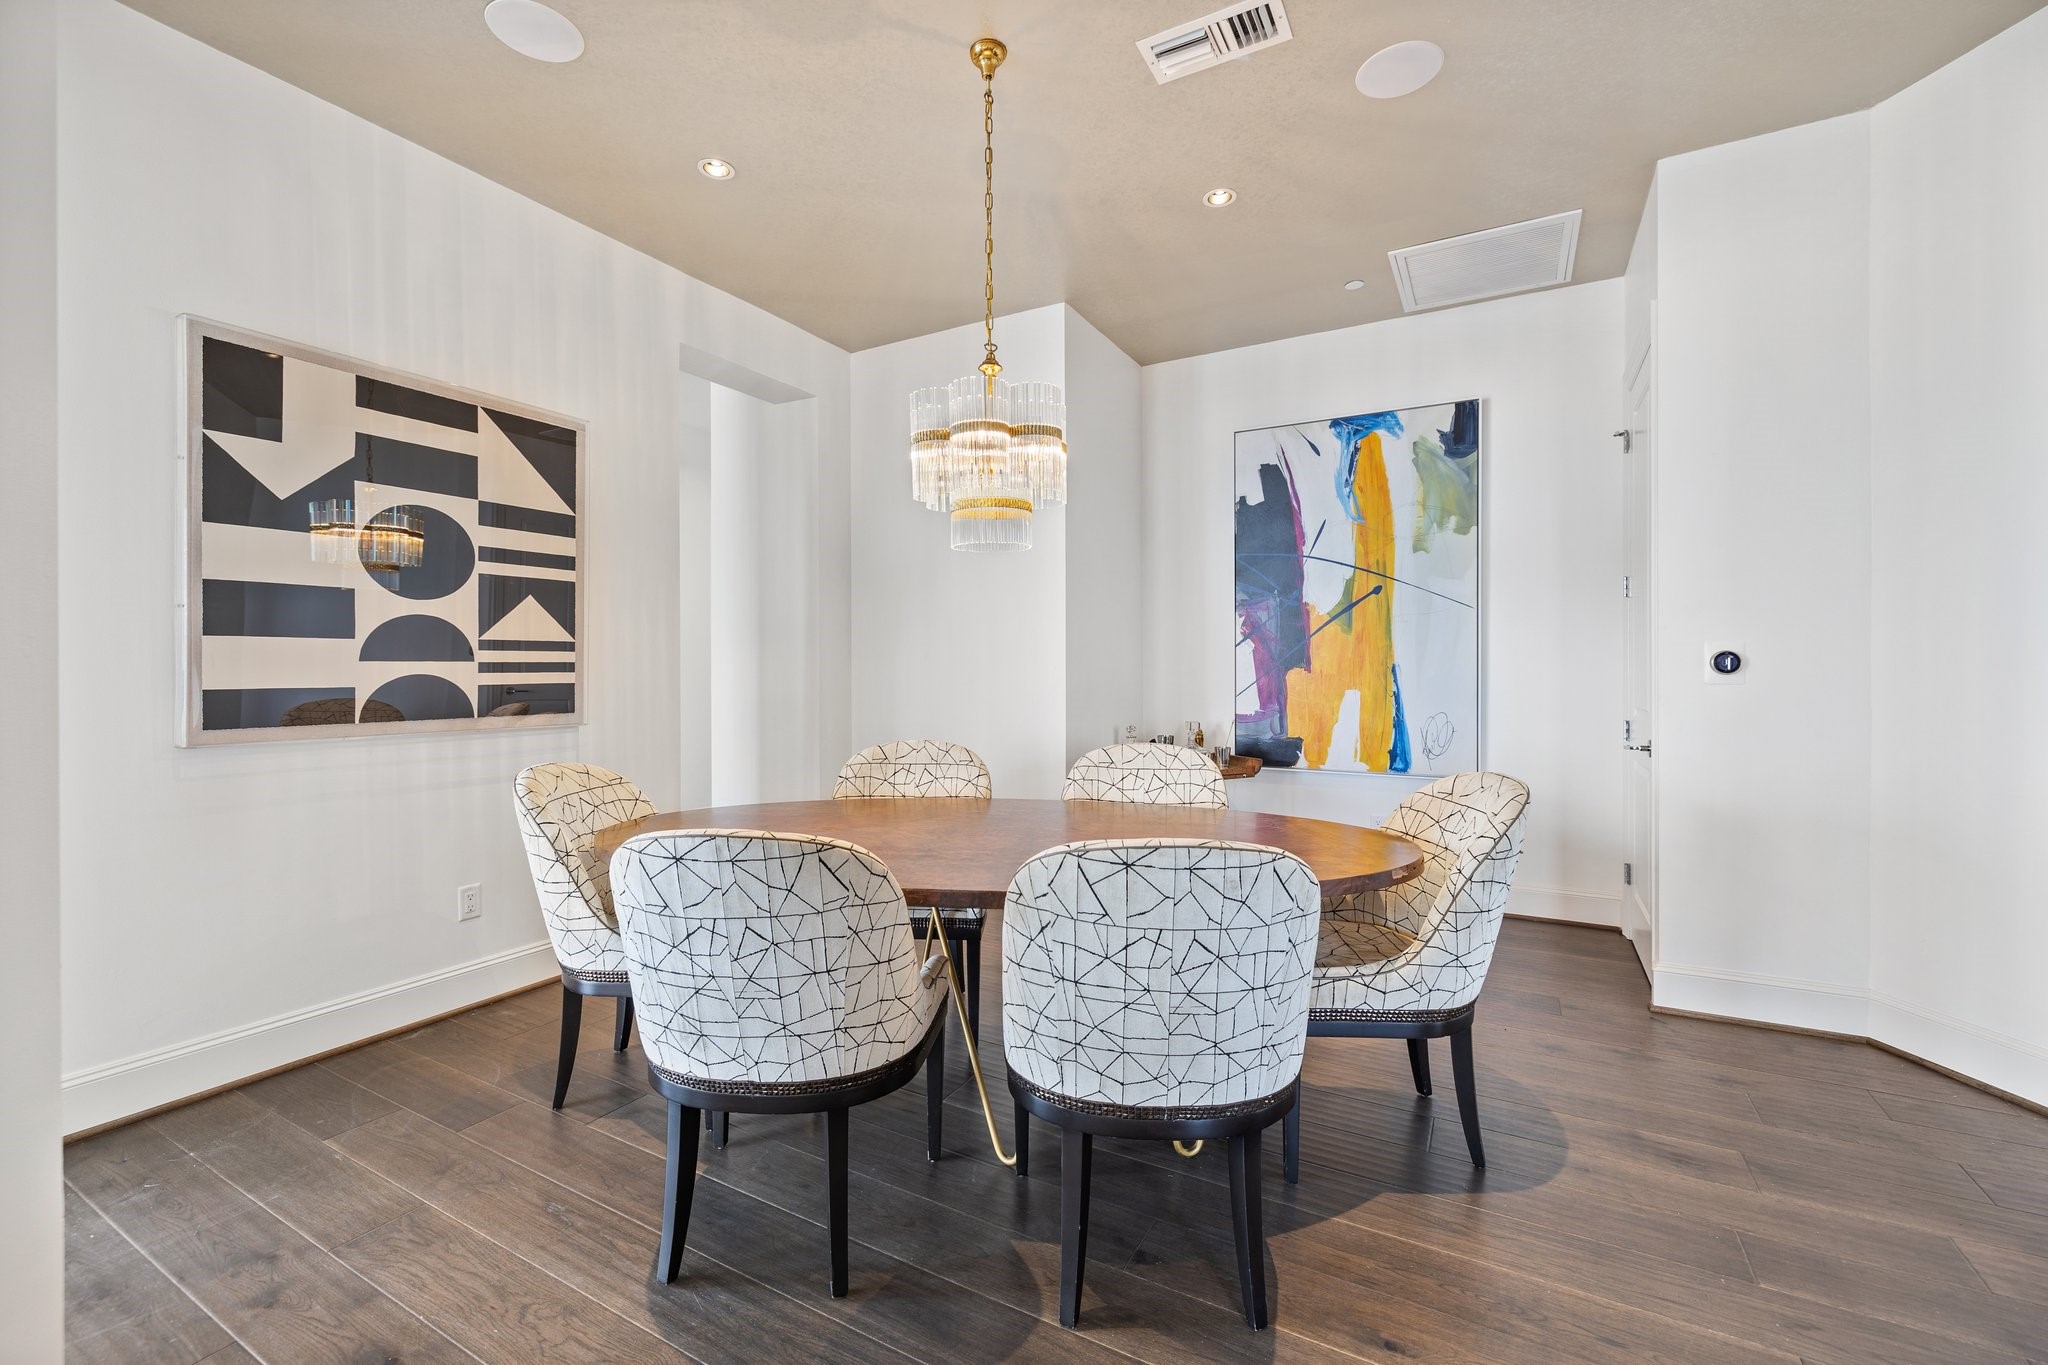 A perfectly placed dining area with a beautiful glass chandelier, new wood floors, and freshly painted white walls provides a sophisticated feel.